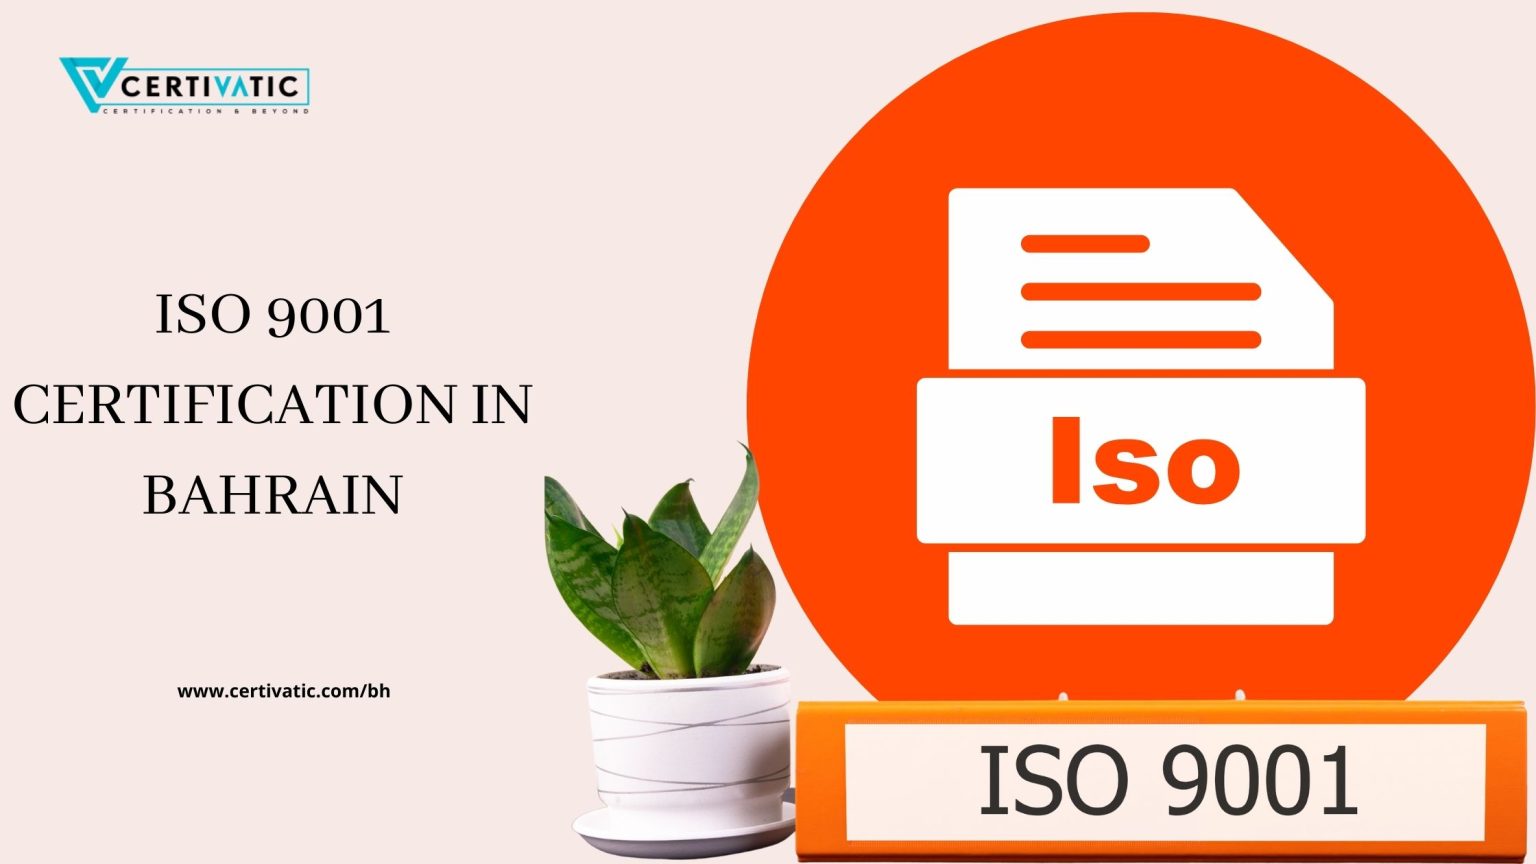 What are the 6 Stages of ISO 9001 Certification in Bahrain?